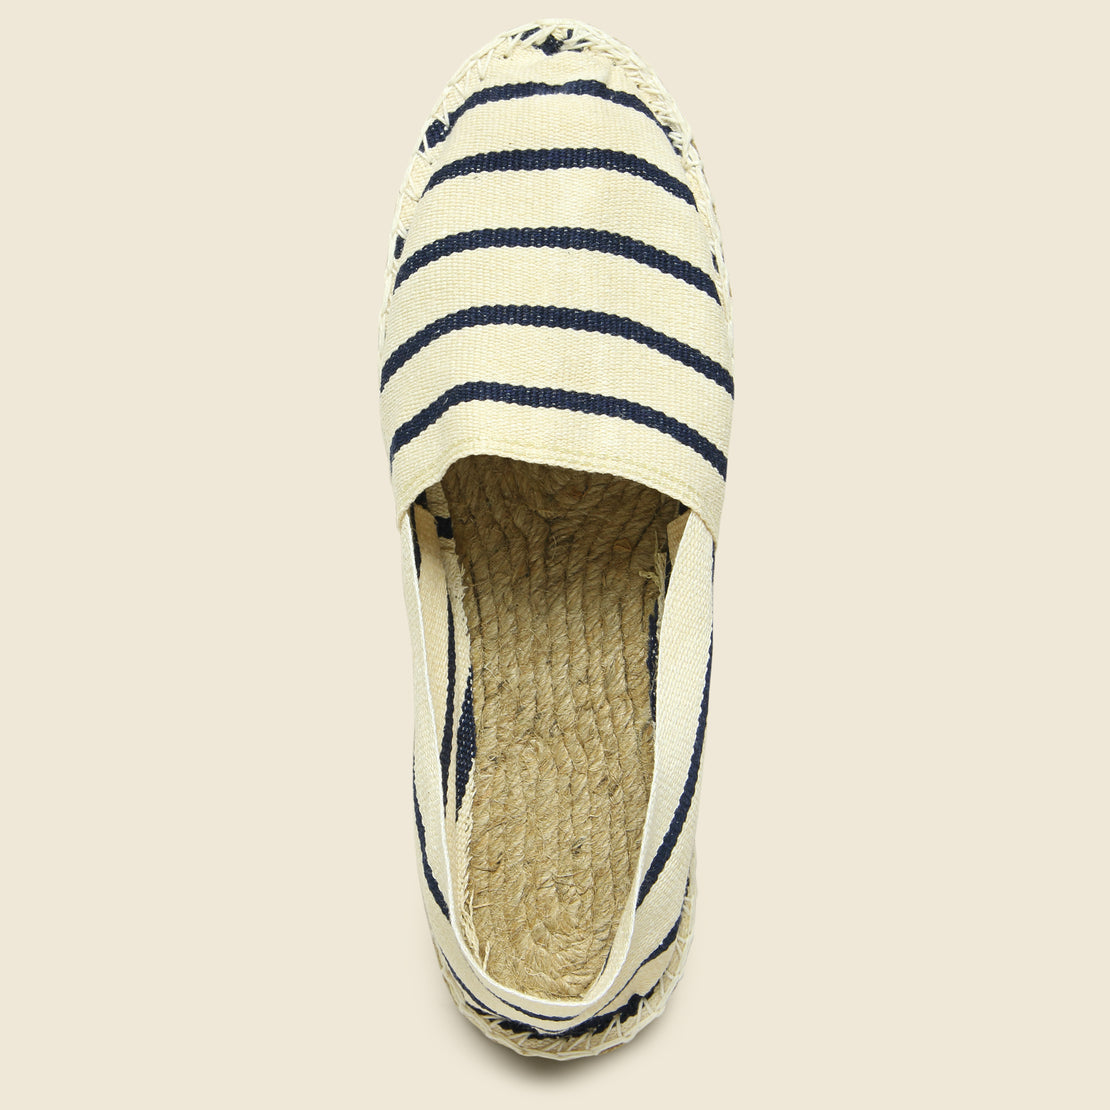 Stripe Espadrilles - Navy/Natural - Armor Lux - STAG Provisions - W - Shoes - Sandals